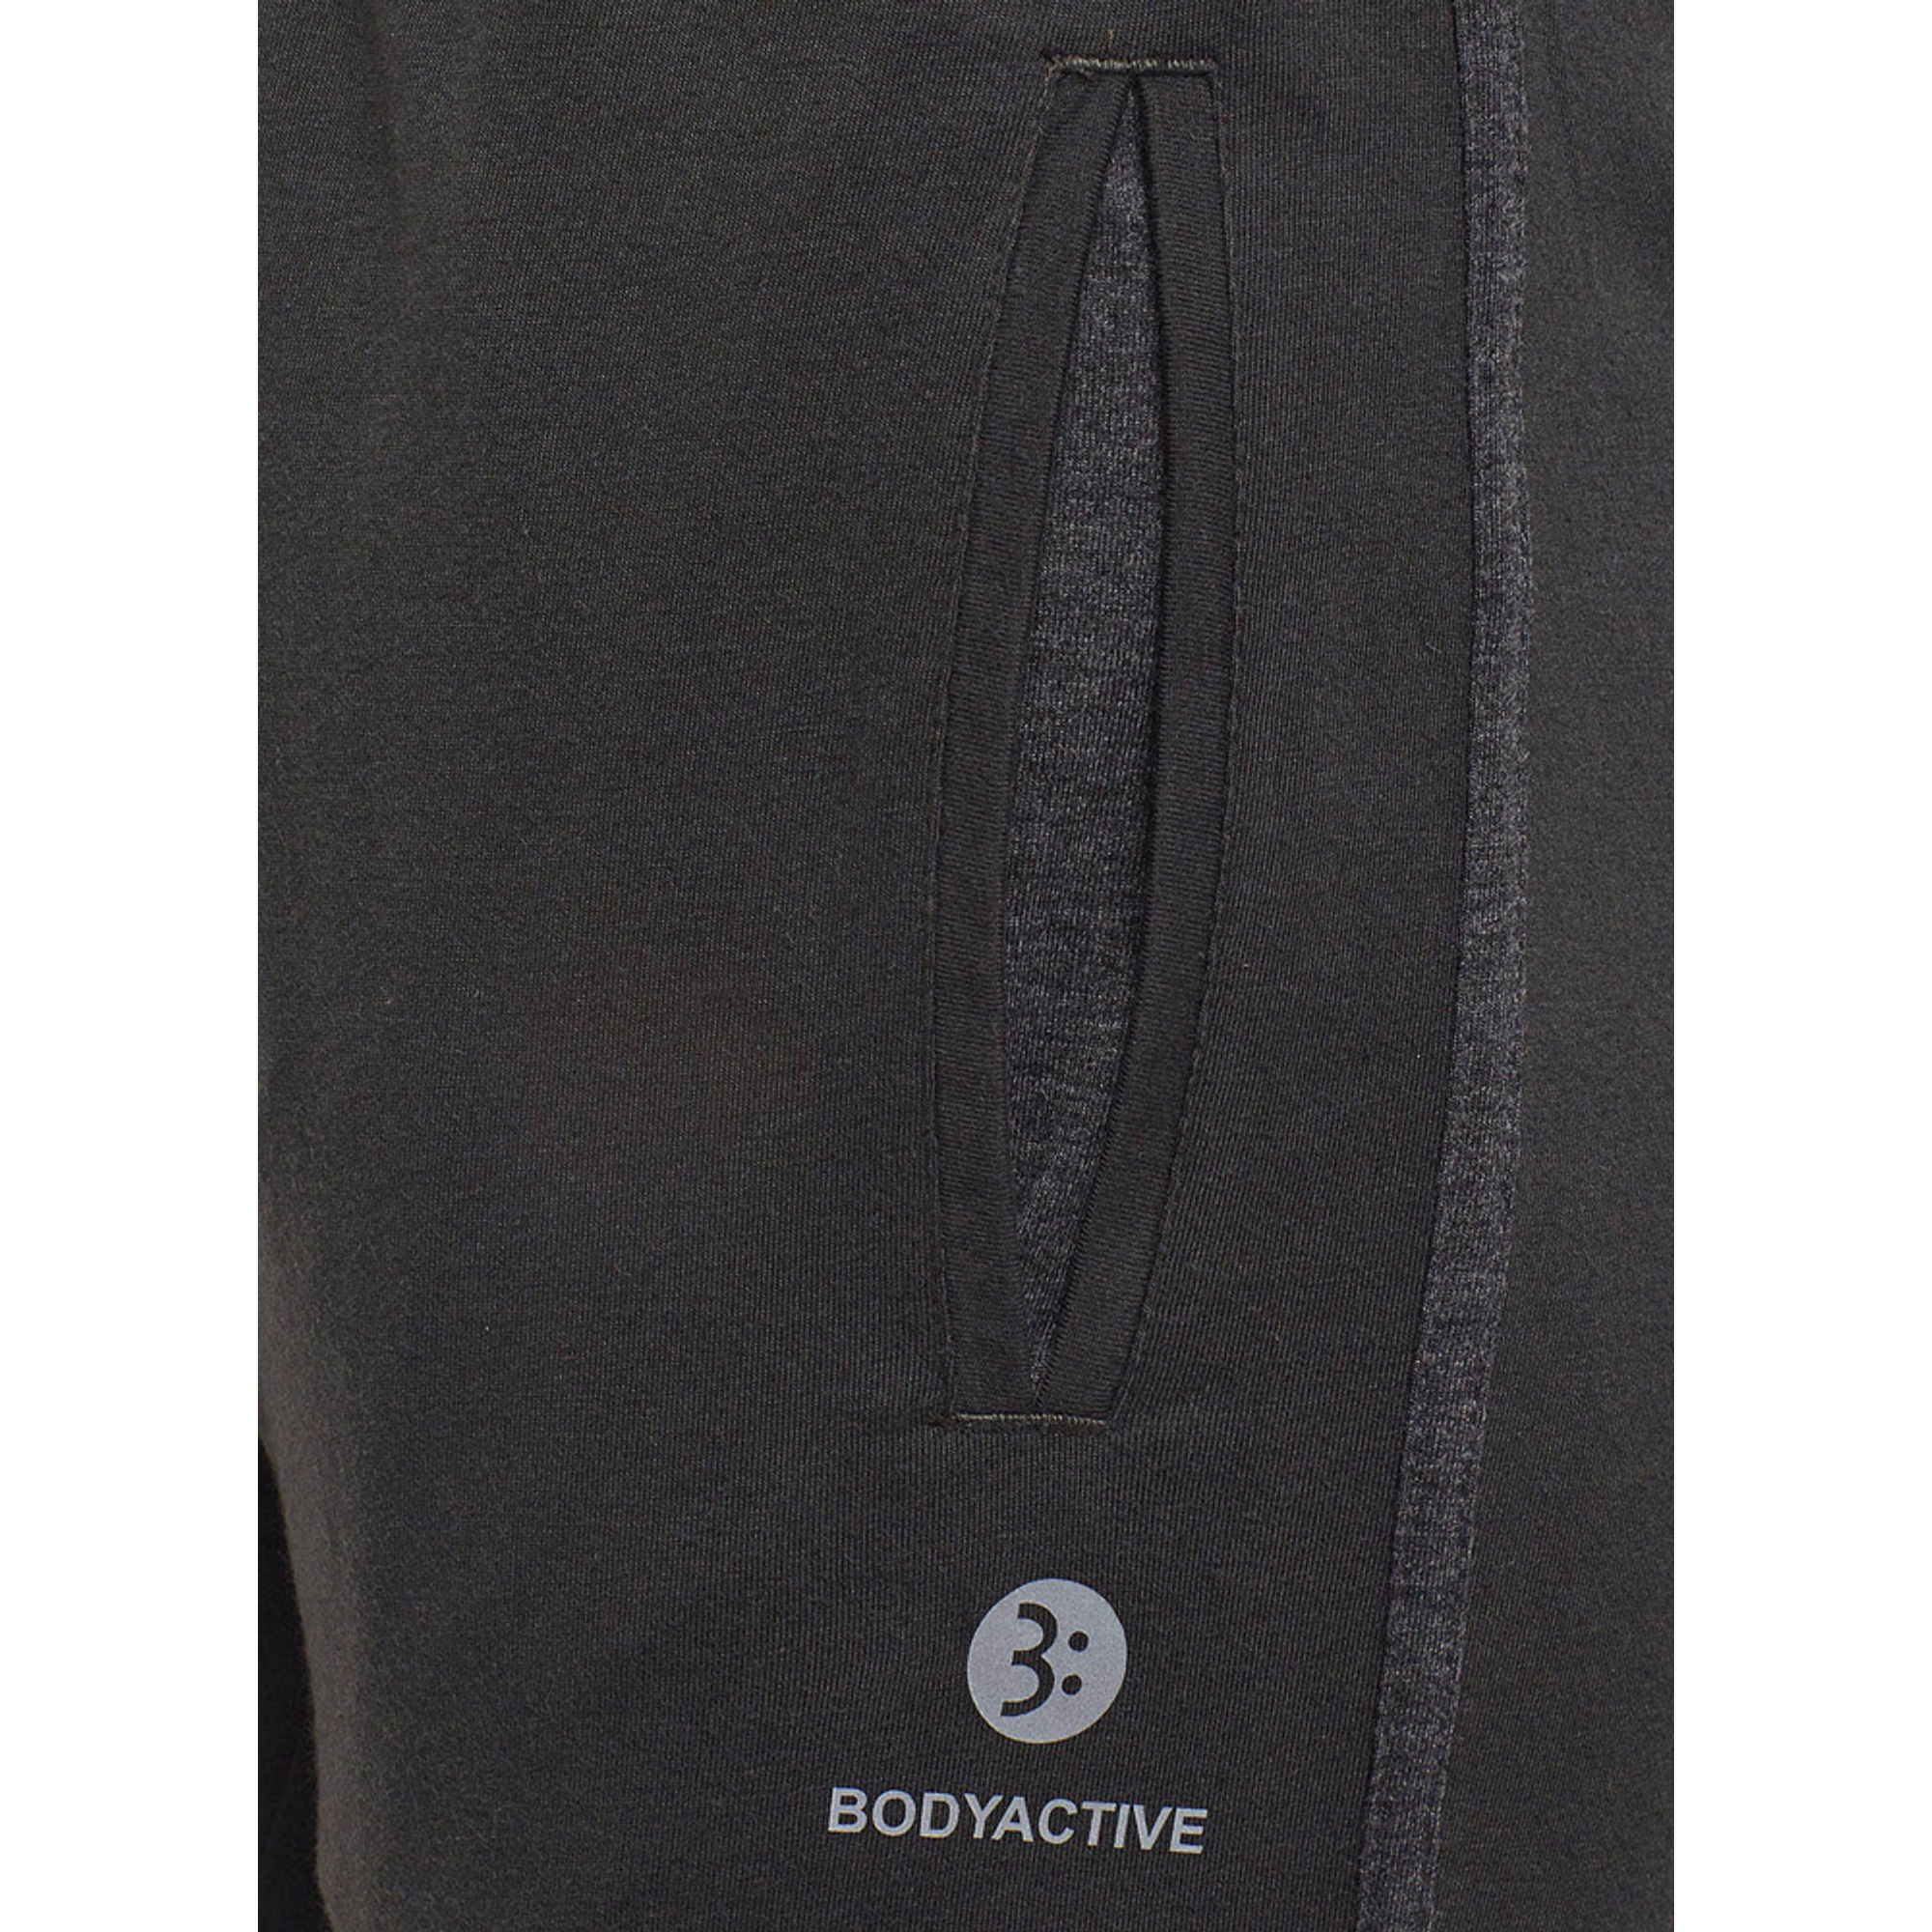 ZENGVEE Men'S Sweatpants With Zipper Pockets Open Bottom Athletic Pants For  Jogging, Workout, Gym, Running, Training | SHEIN USA